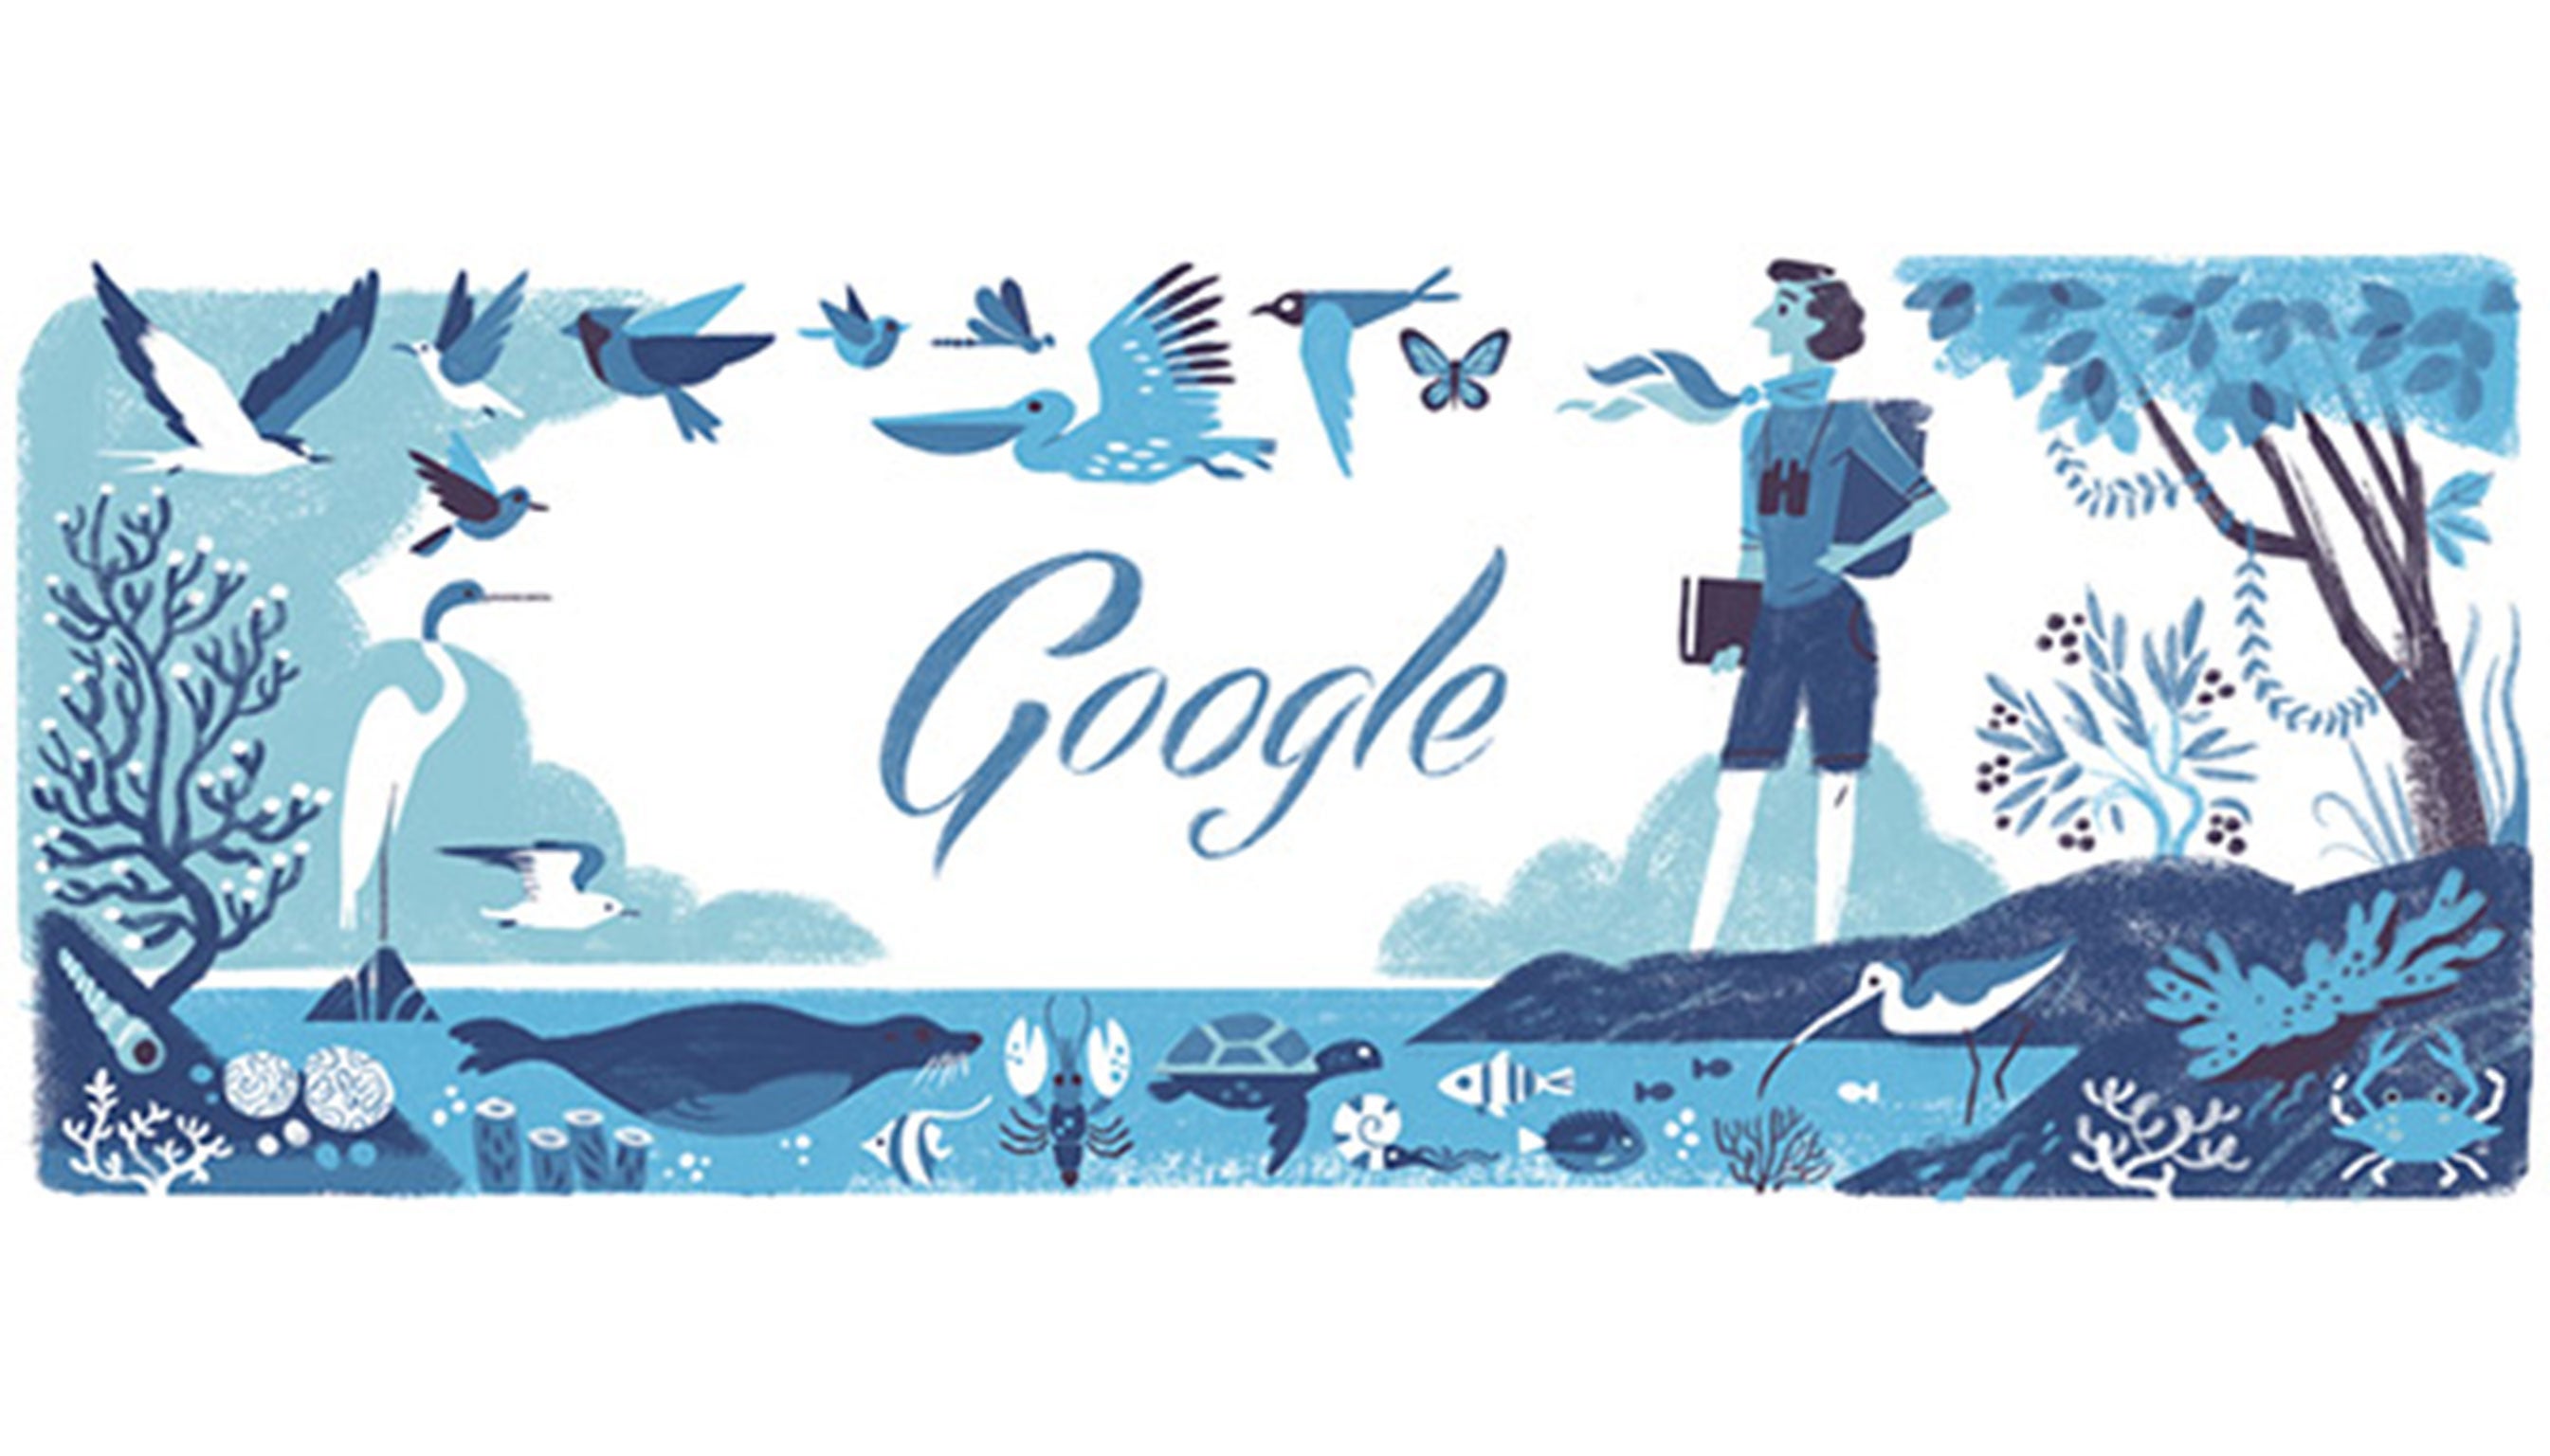 The Google doodle to commemorate the 107th anniversary of the birth of Rachel Louise Carson